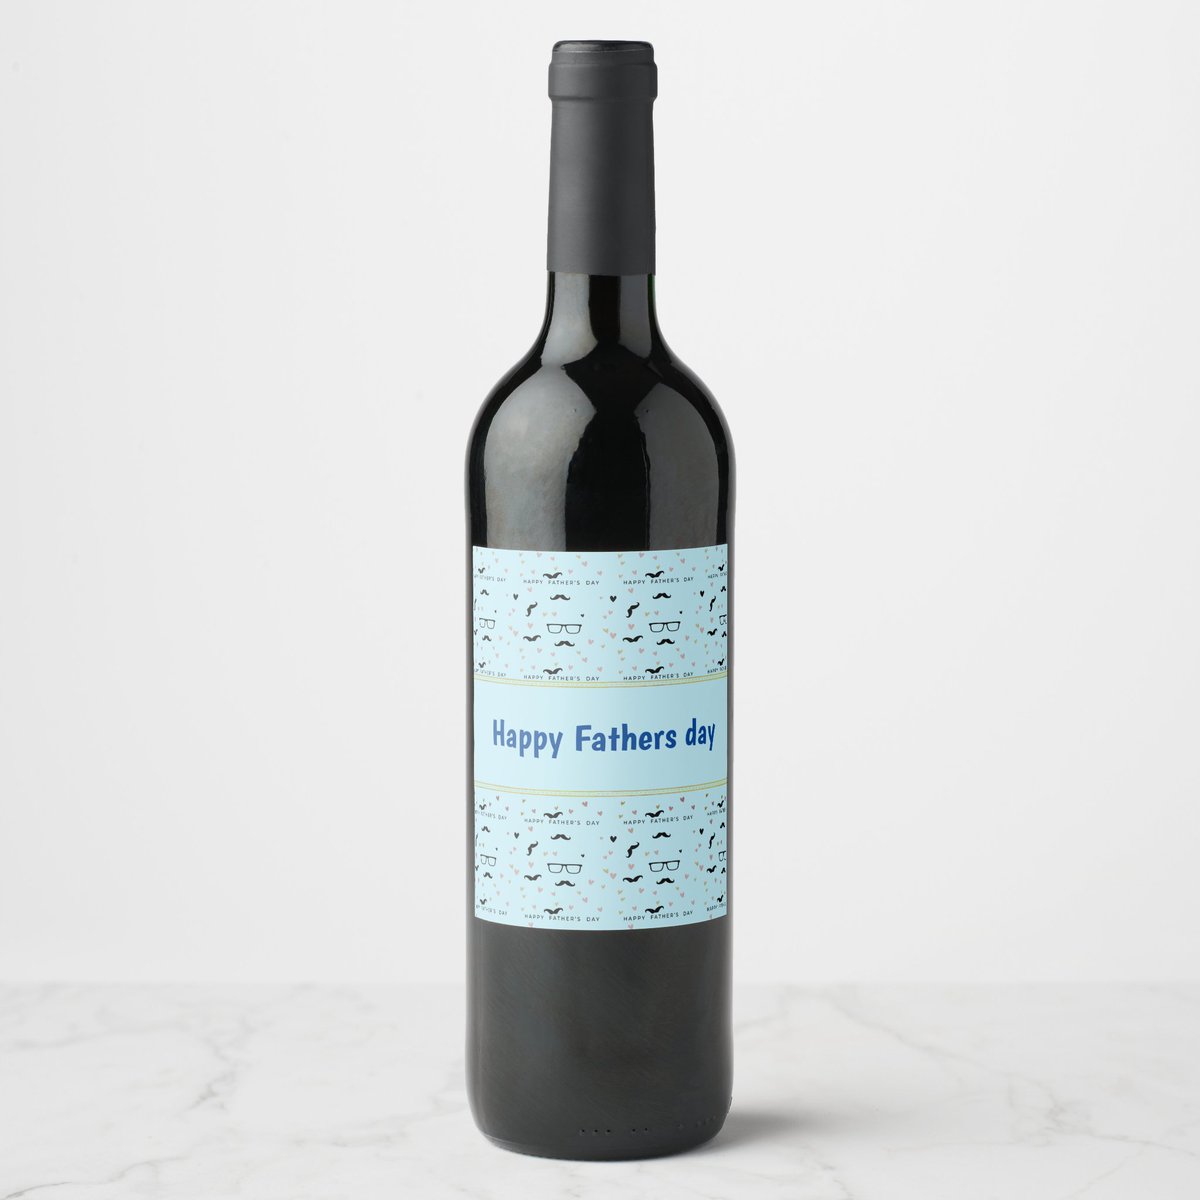 'Raise a glass to Dad this Father's Day with a personalized wine label!
#FathersDay, #GiftsForDad, #CustomWineLabel
#PersonalizedGifts, #DadDeservesIt, #ZazzleFinds
#Fatherhood, #ToastToDad, #FamilyTime

Happy Fathers Day Wine Label zazzle.com/happy_fathers_… via @zazzle